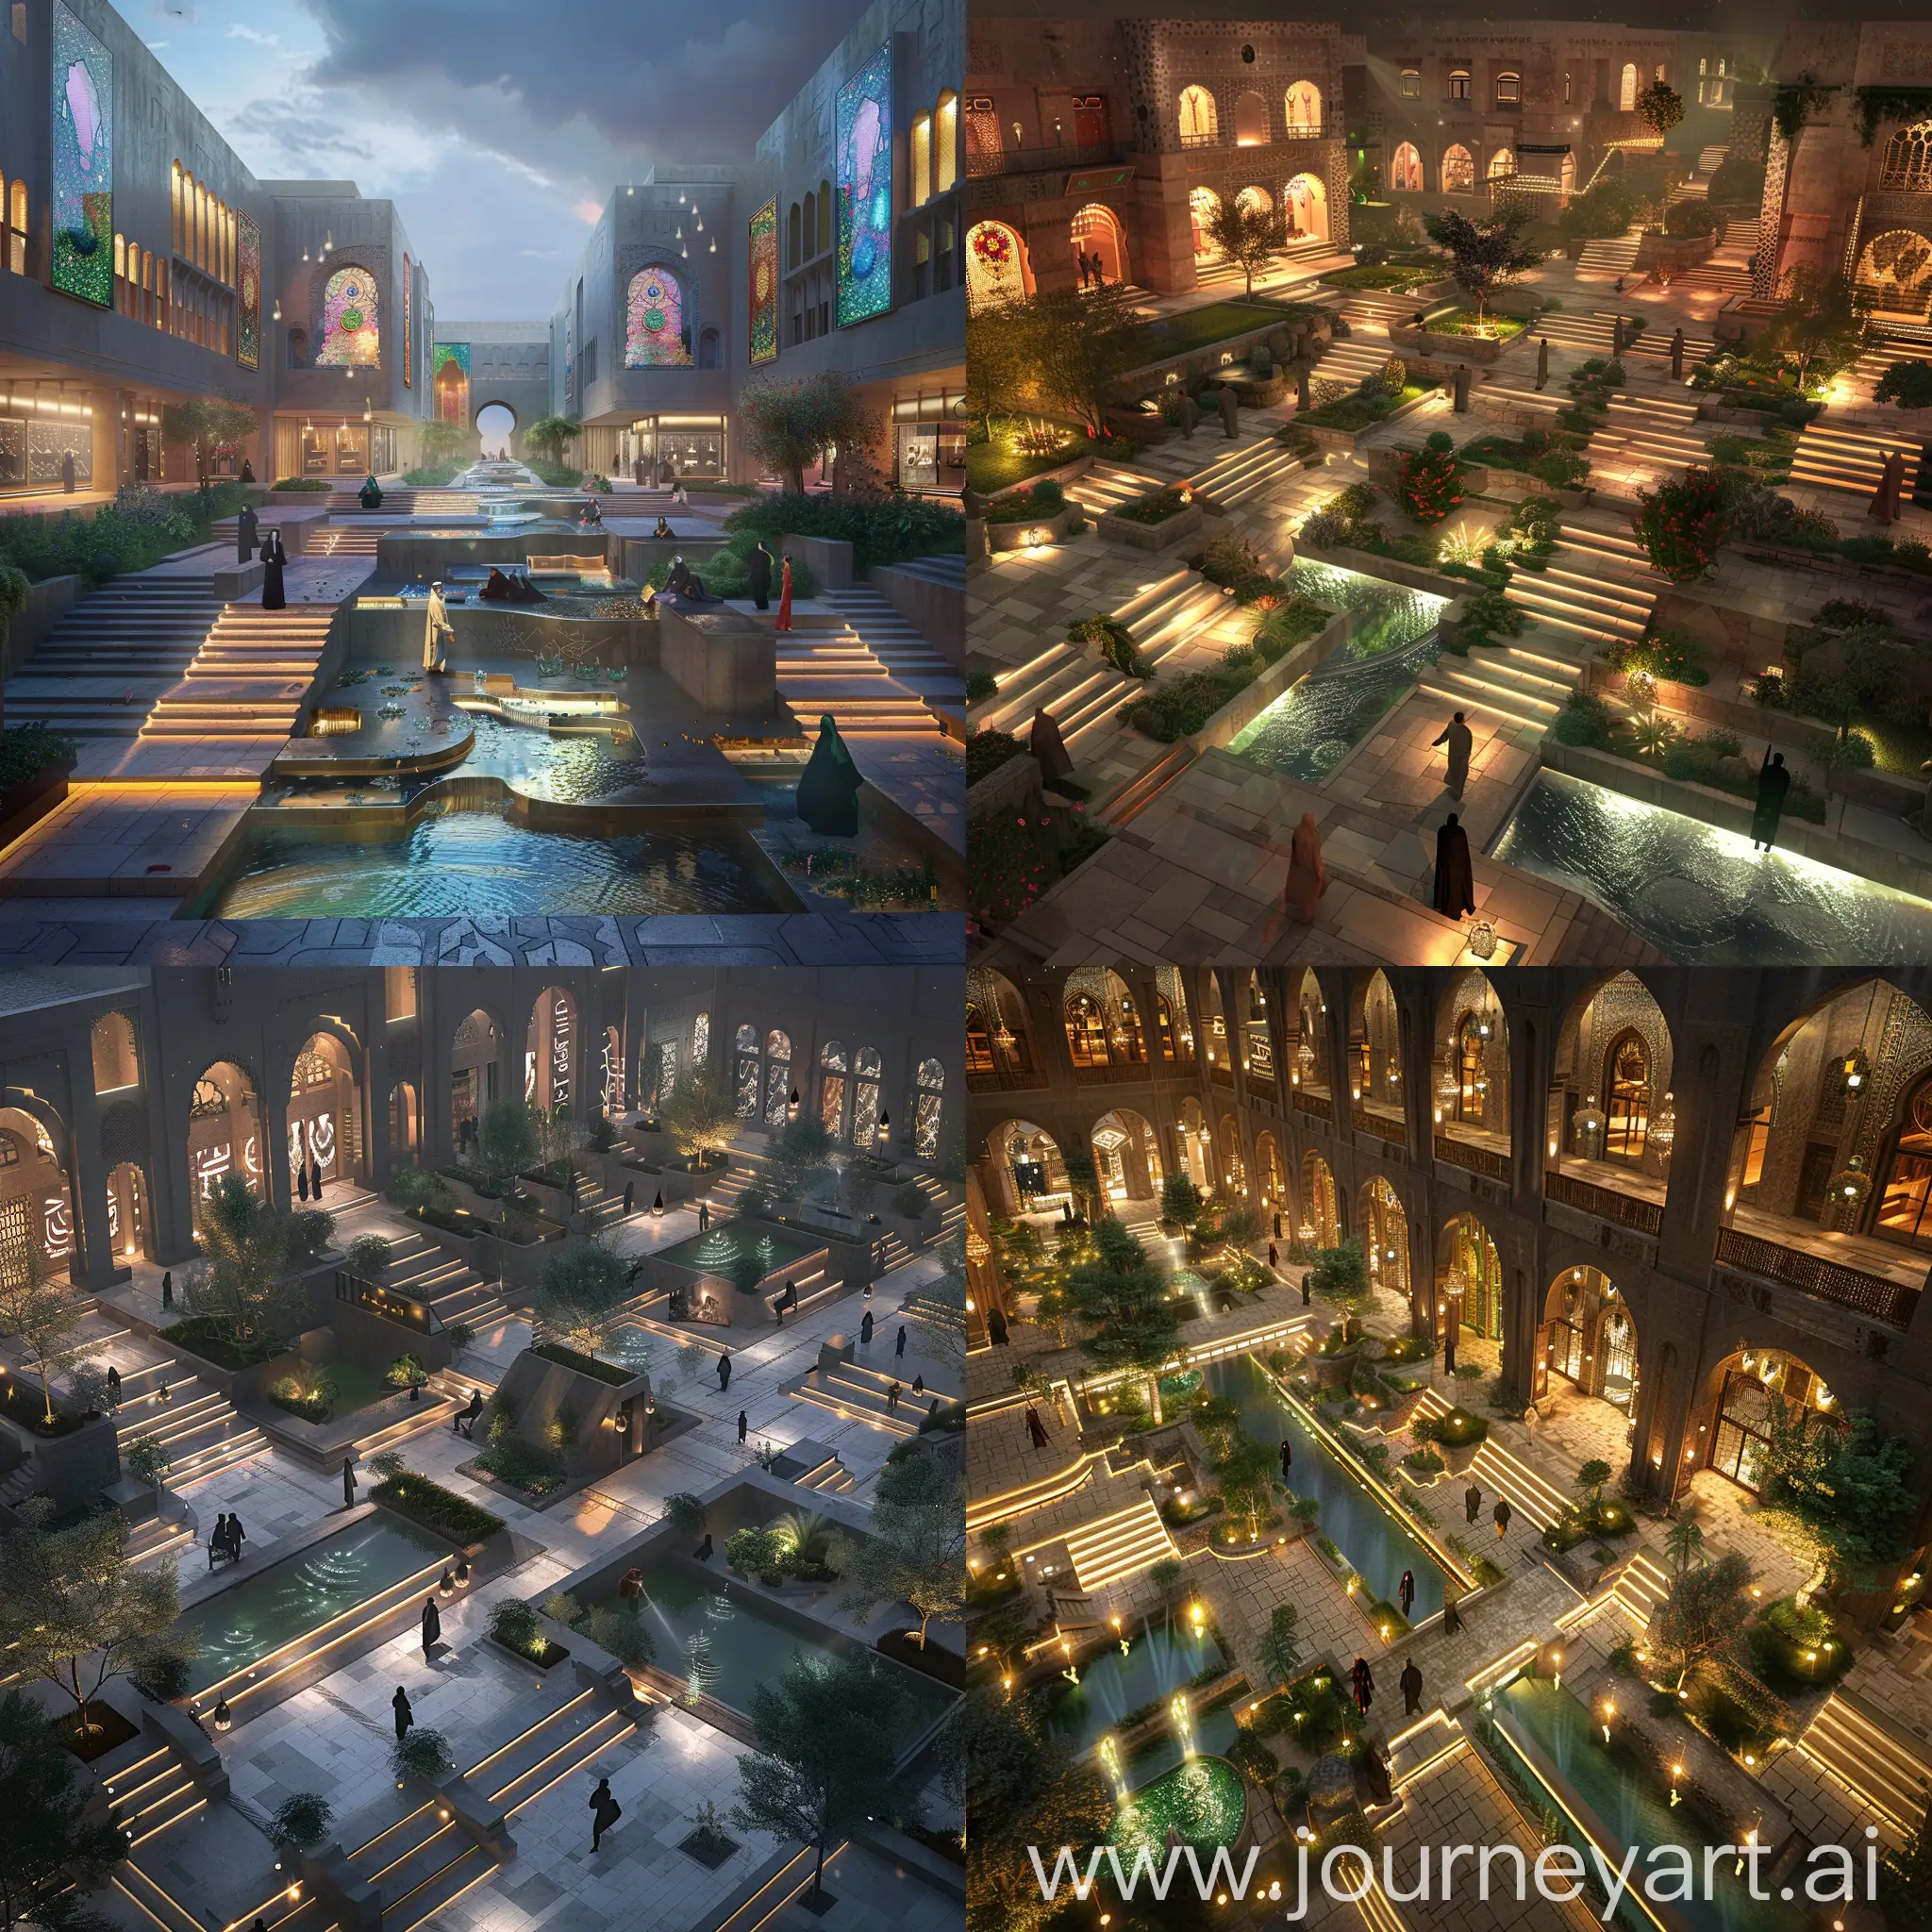 landscape urban deconstruction design of jewelry shops facades with steps and led light between them with water features and some greens and pedestrian paths a huge courtyard with Hijazi Arabian style with interactive people